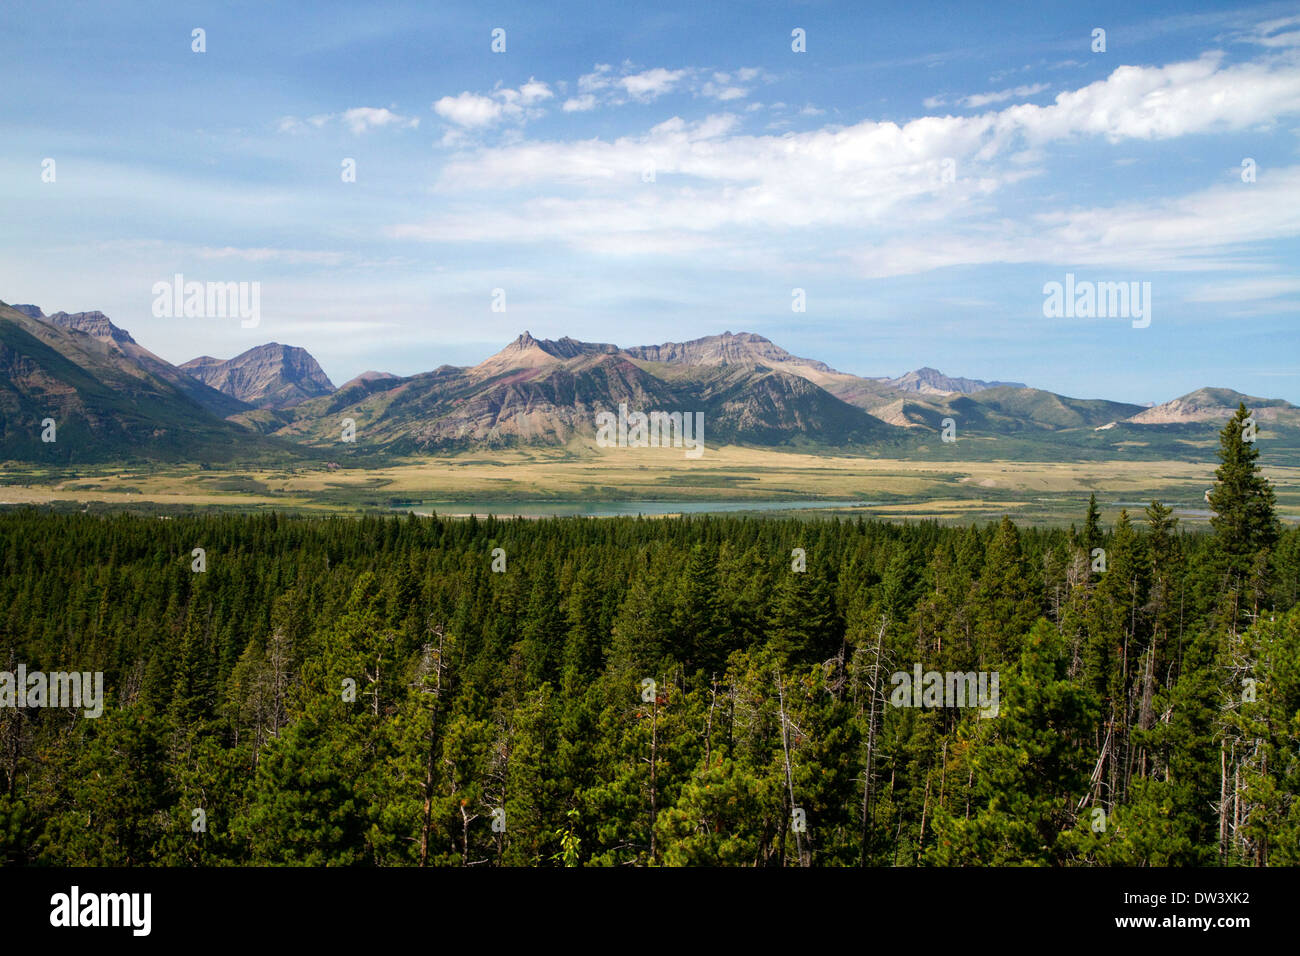 Scenic view of the Canadian Rockies in Waterton Lakes National Park, Alberta, Canada. Stock Photo